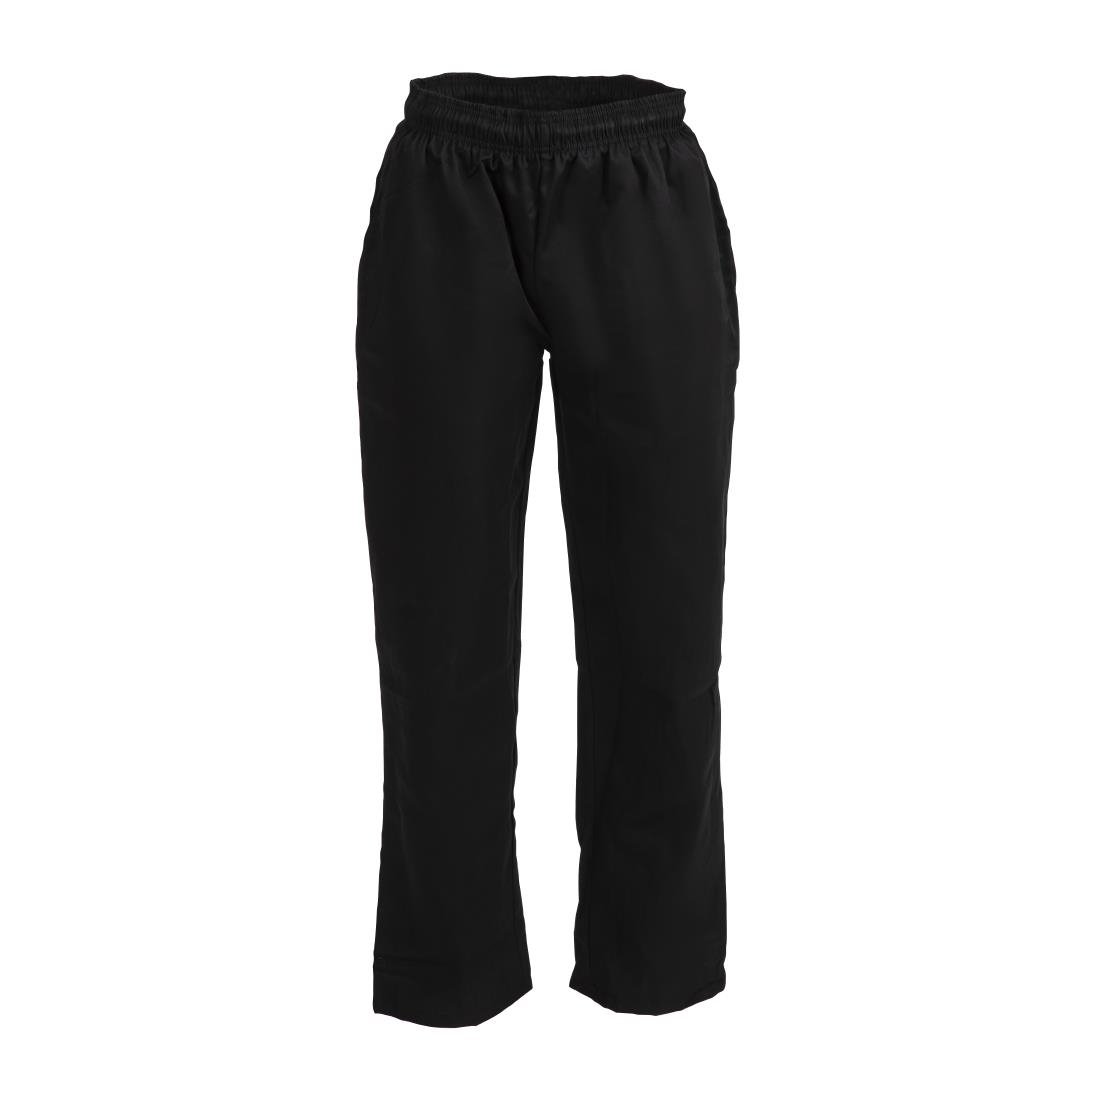 A582-S Whites Vegas Chef Trousers Polycotton Black S JD Catering Equipment Solutions Ltd